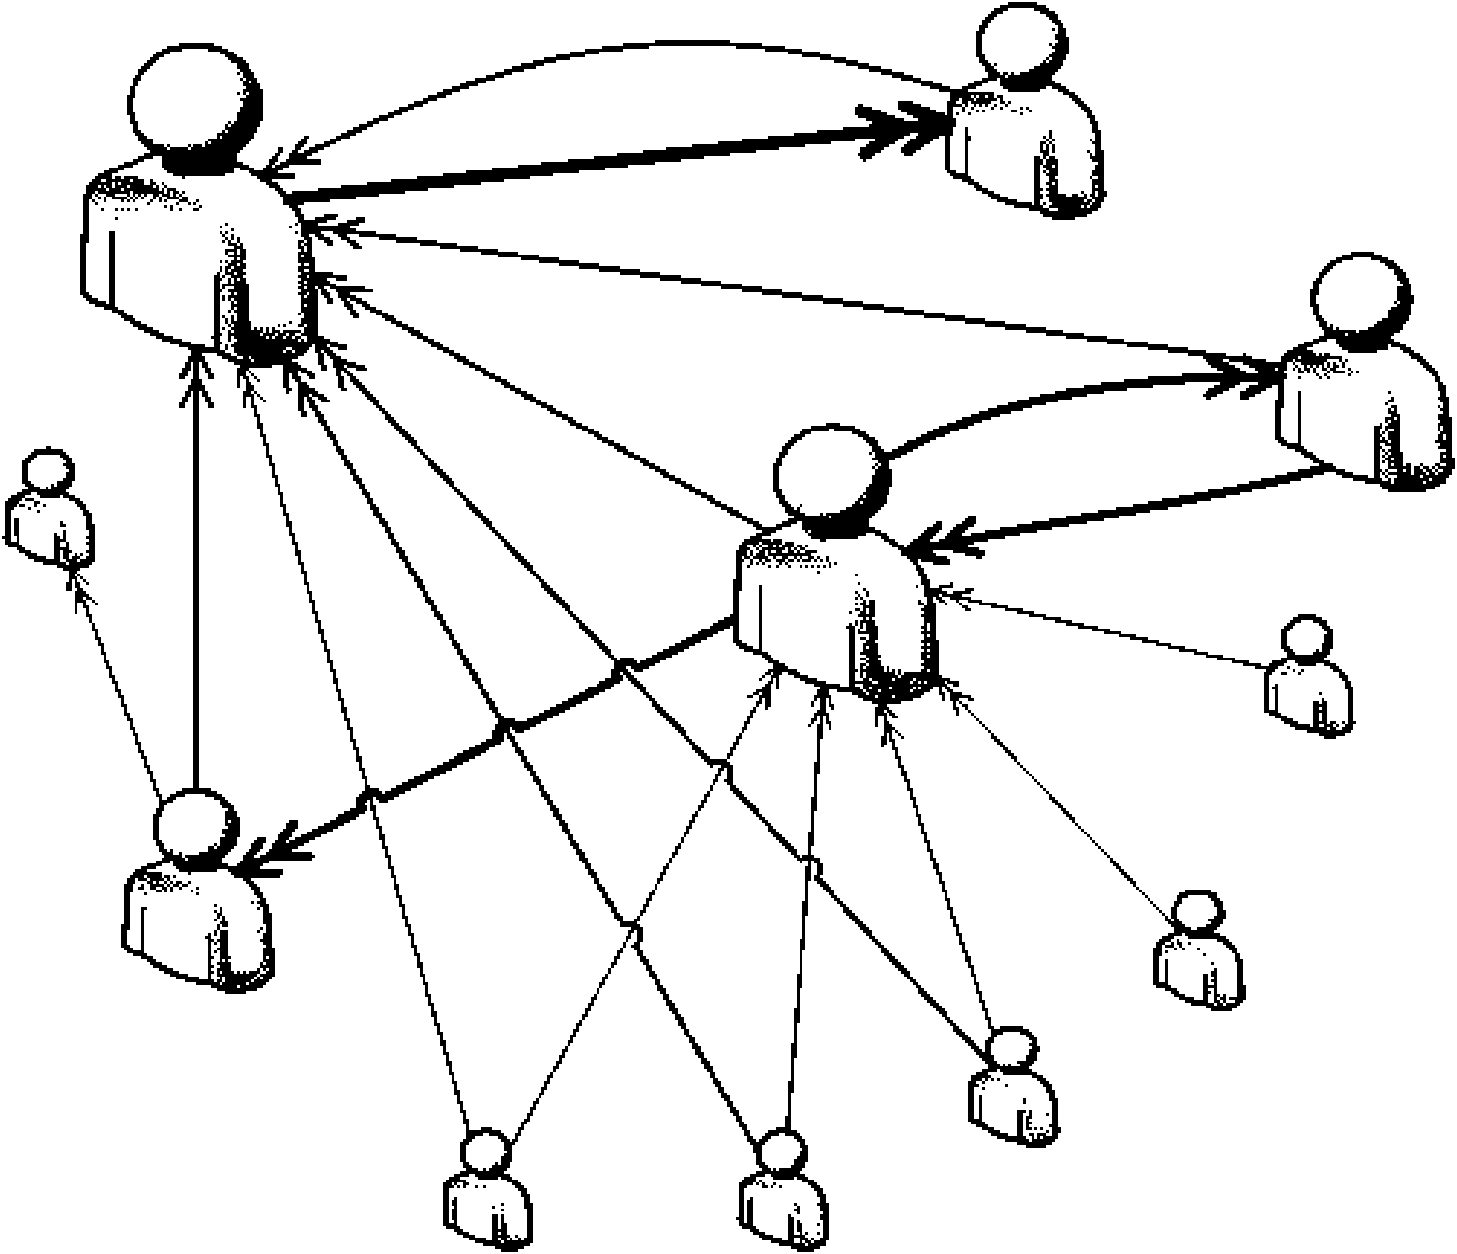 Method and system for calculating user influence in social network